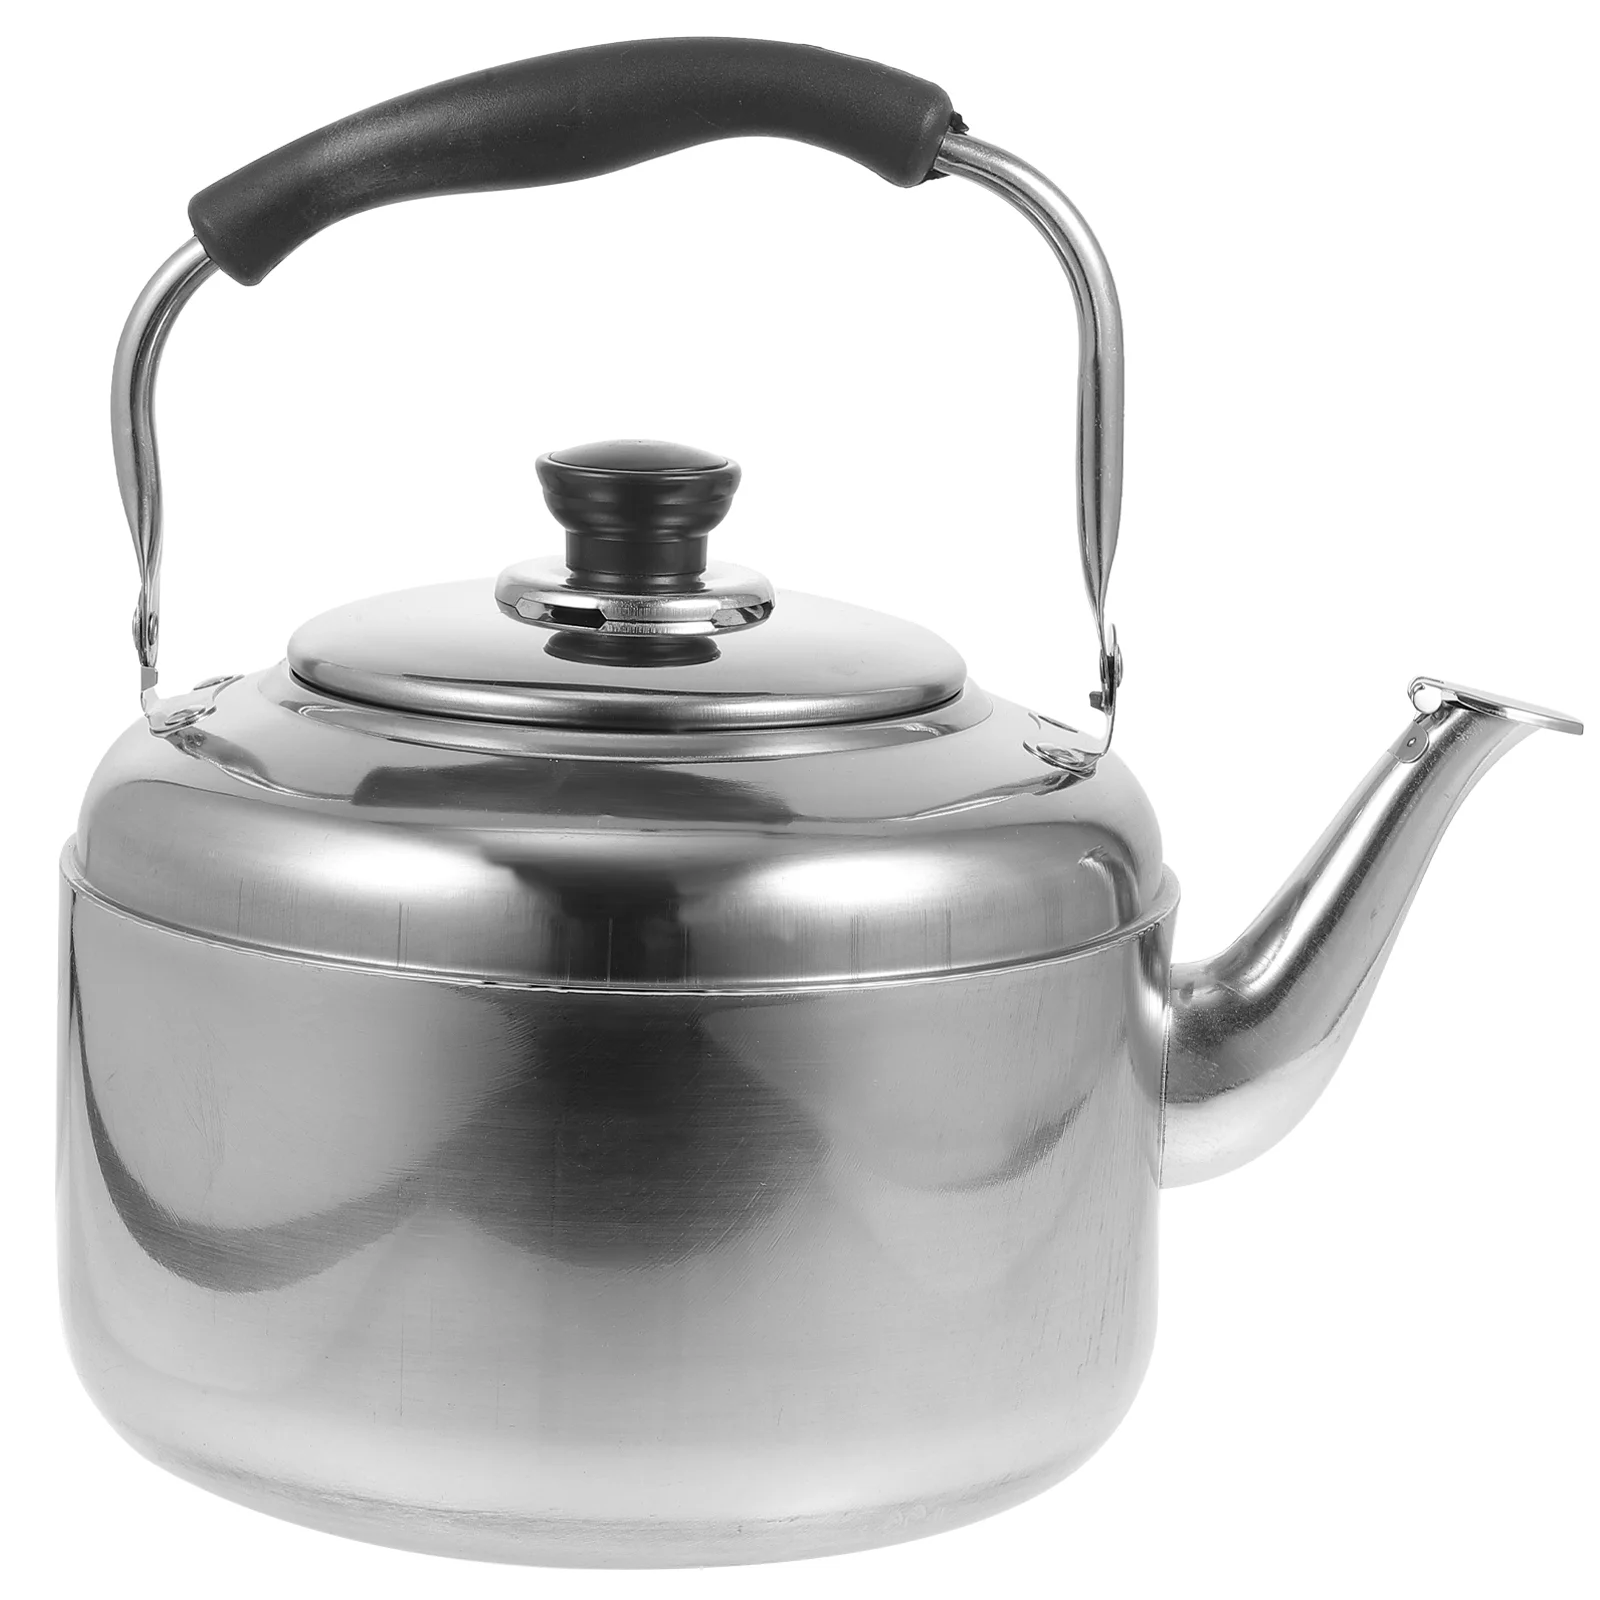 

Kettle Tea Whistling Teapot Water Steel Stovetop Stainless Pot Stovecoffeeboiling Hot Electric Kettles Gas Camping Sounding